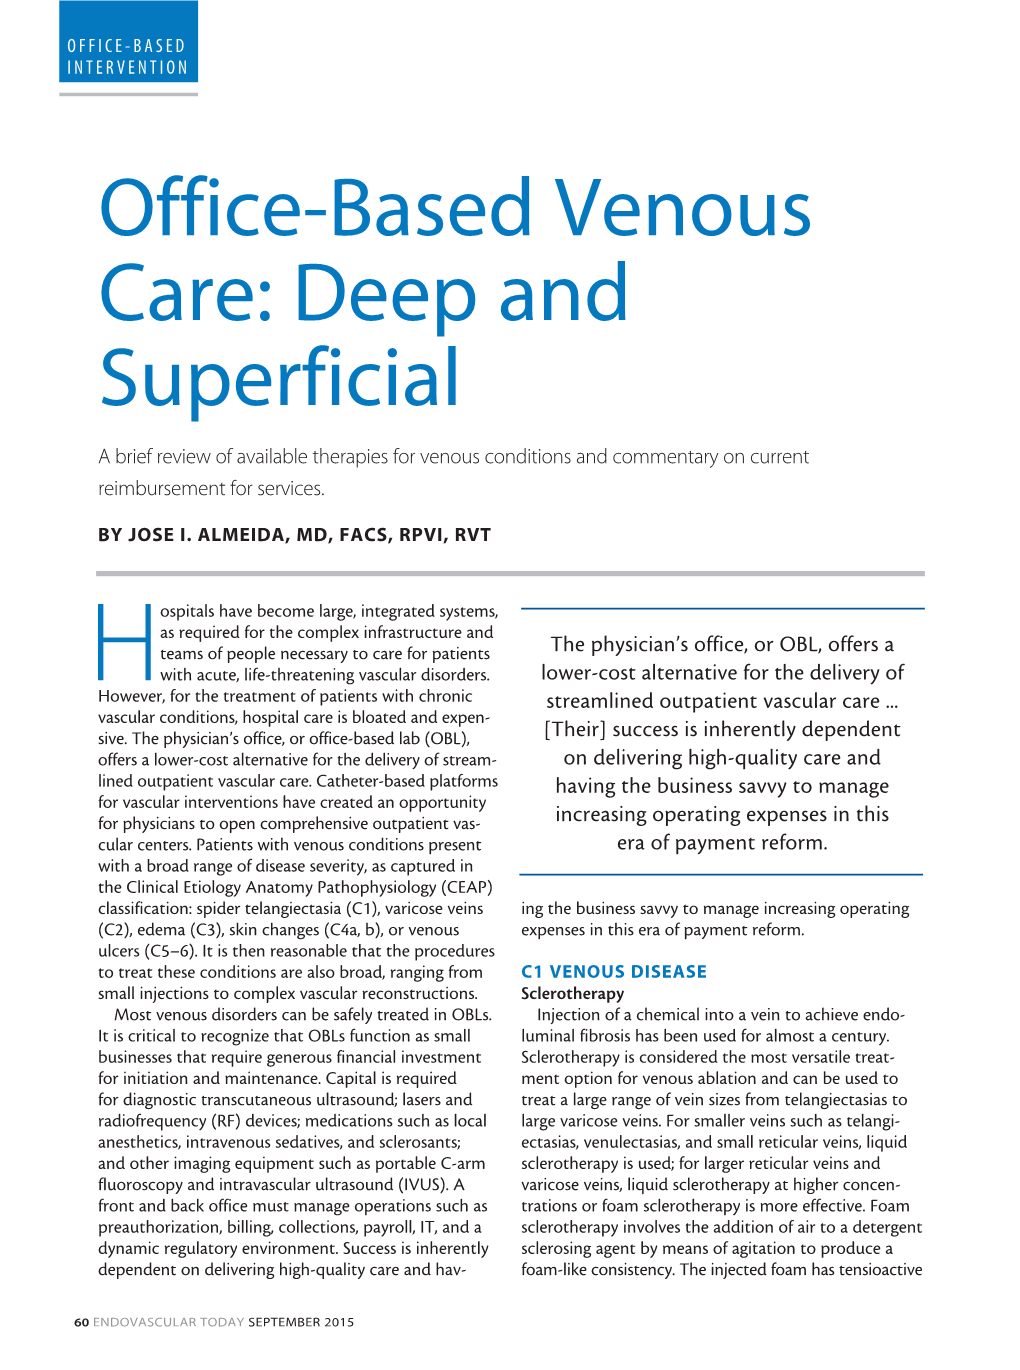 Office-Based Venous Care: Deep and Superficial